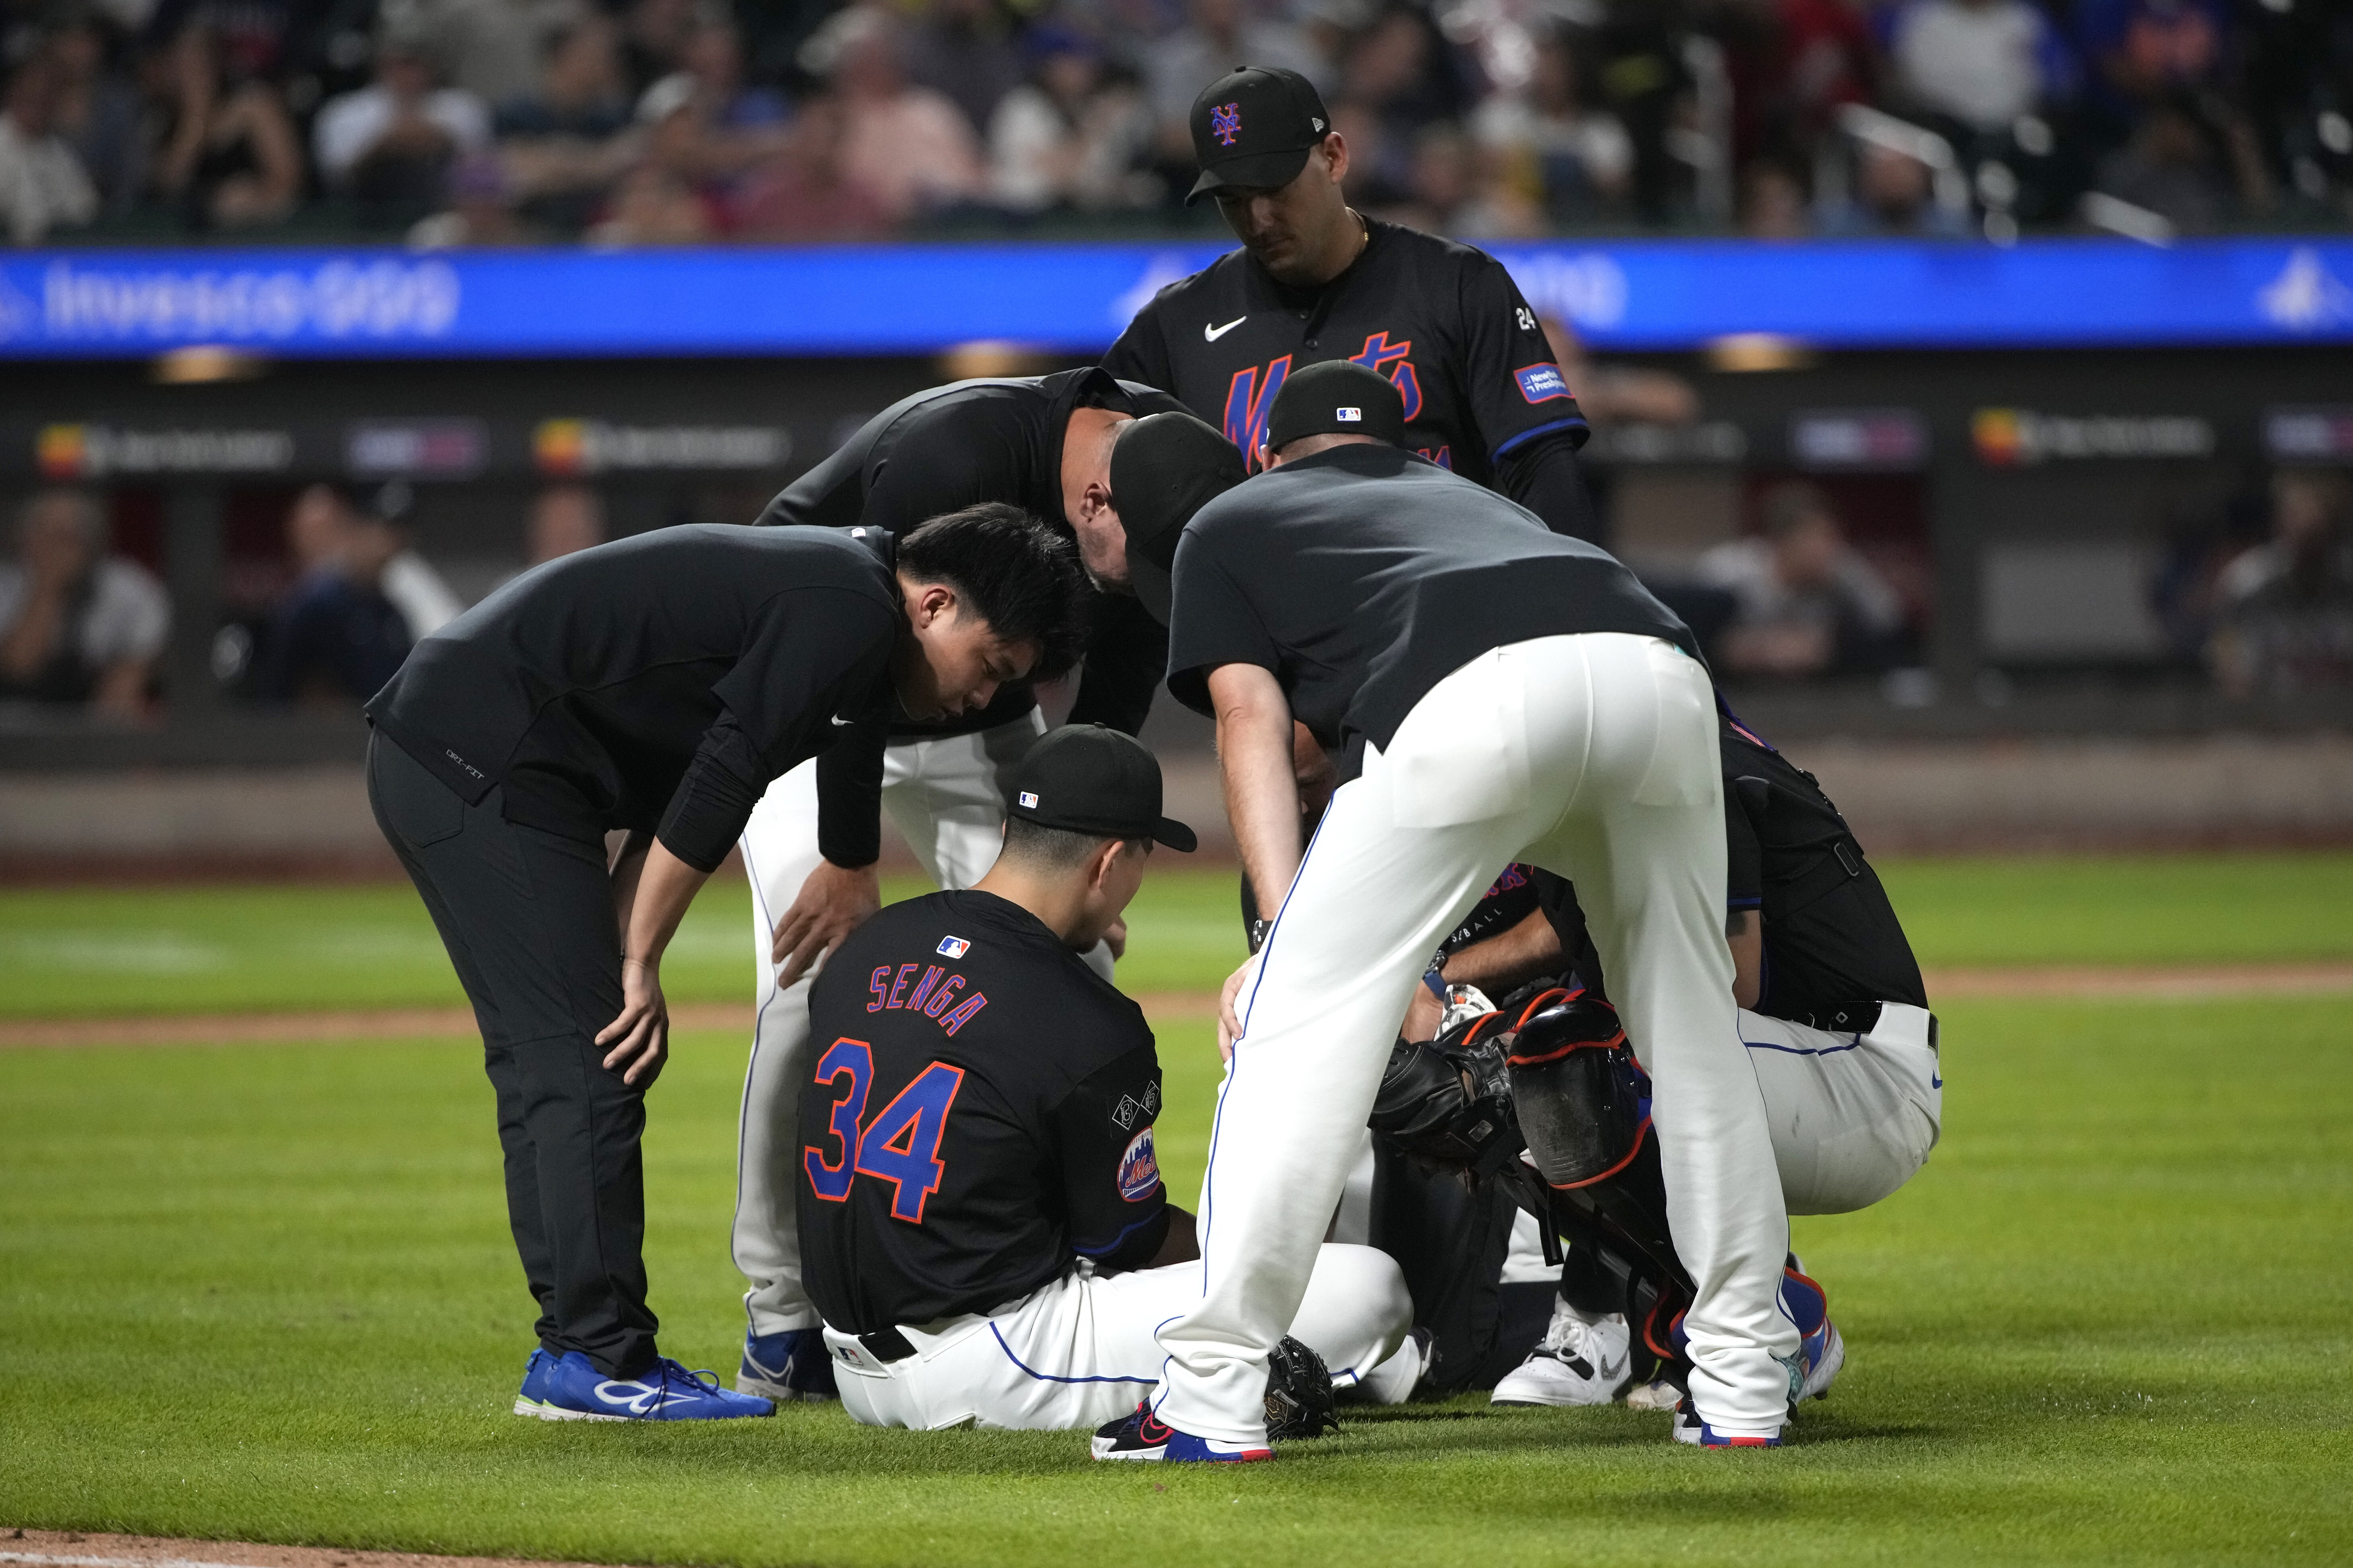 New York Mets staff members check pitcher Kodai Senga (34) after he was injured during the sixth in...